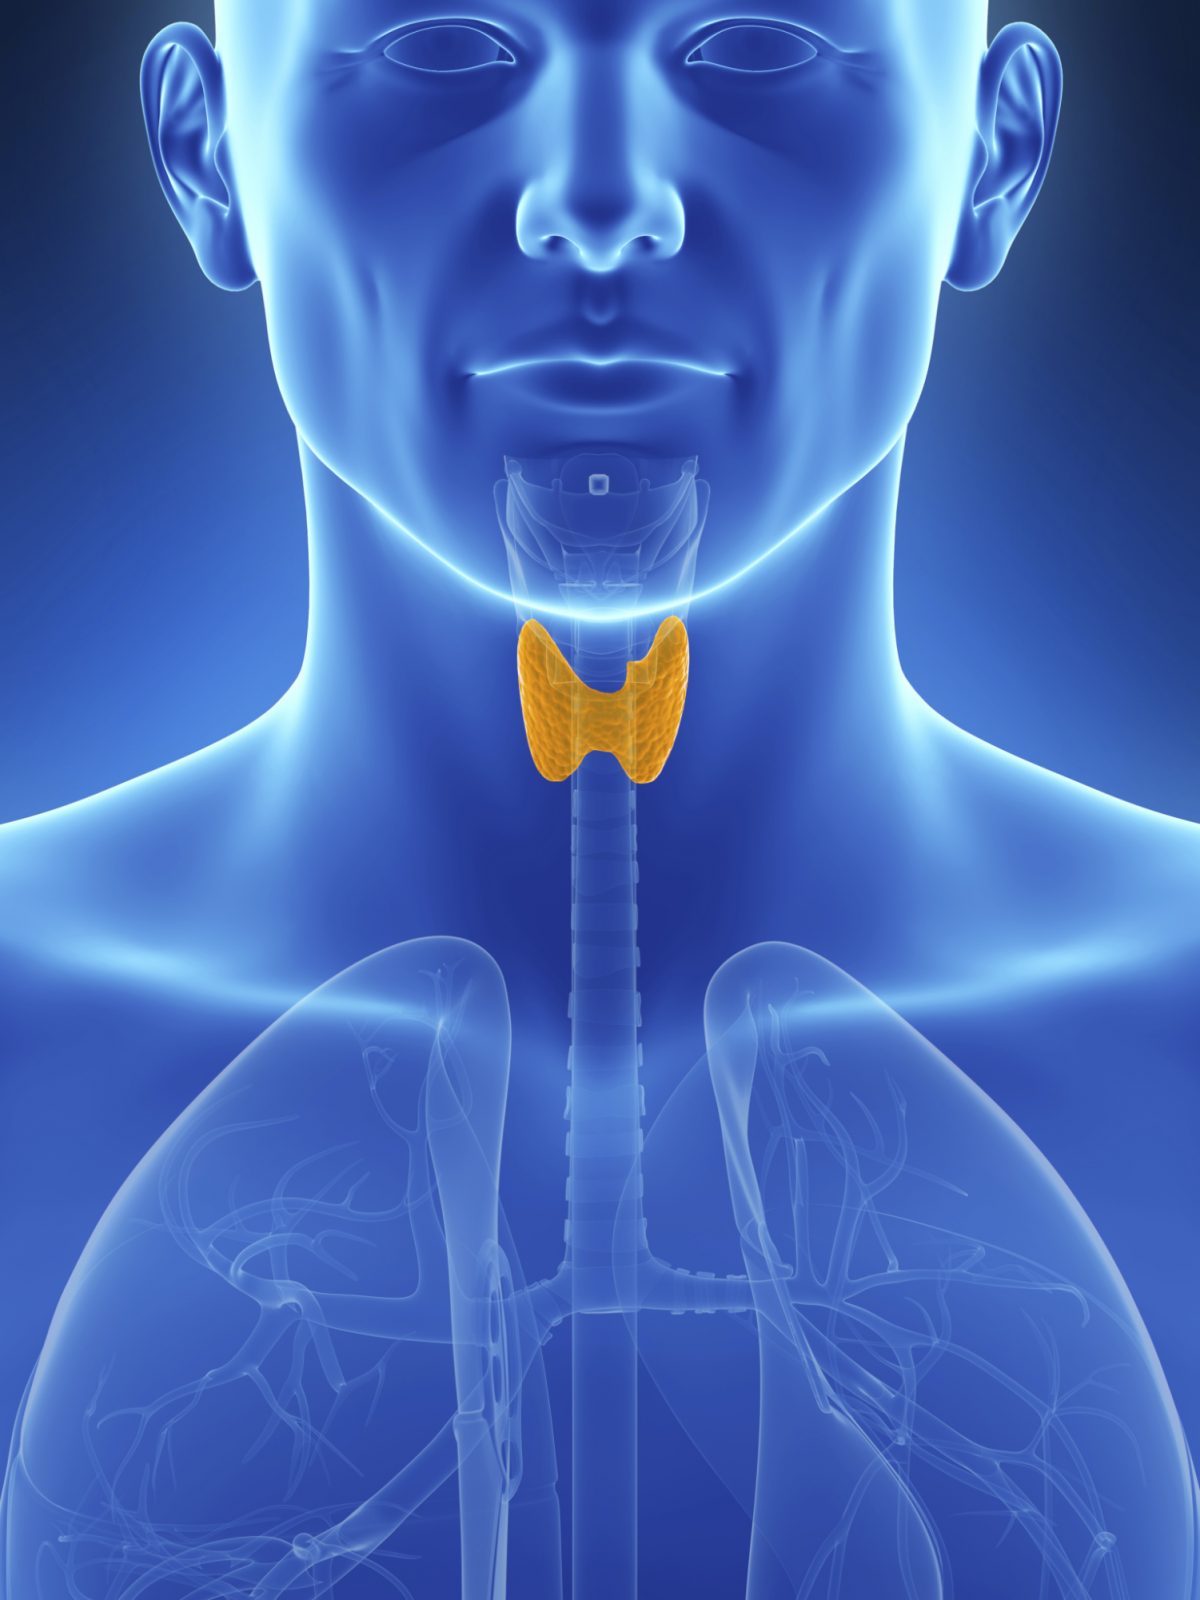 Advice for Men With Underactive Thyroid